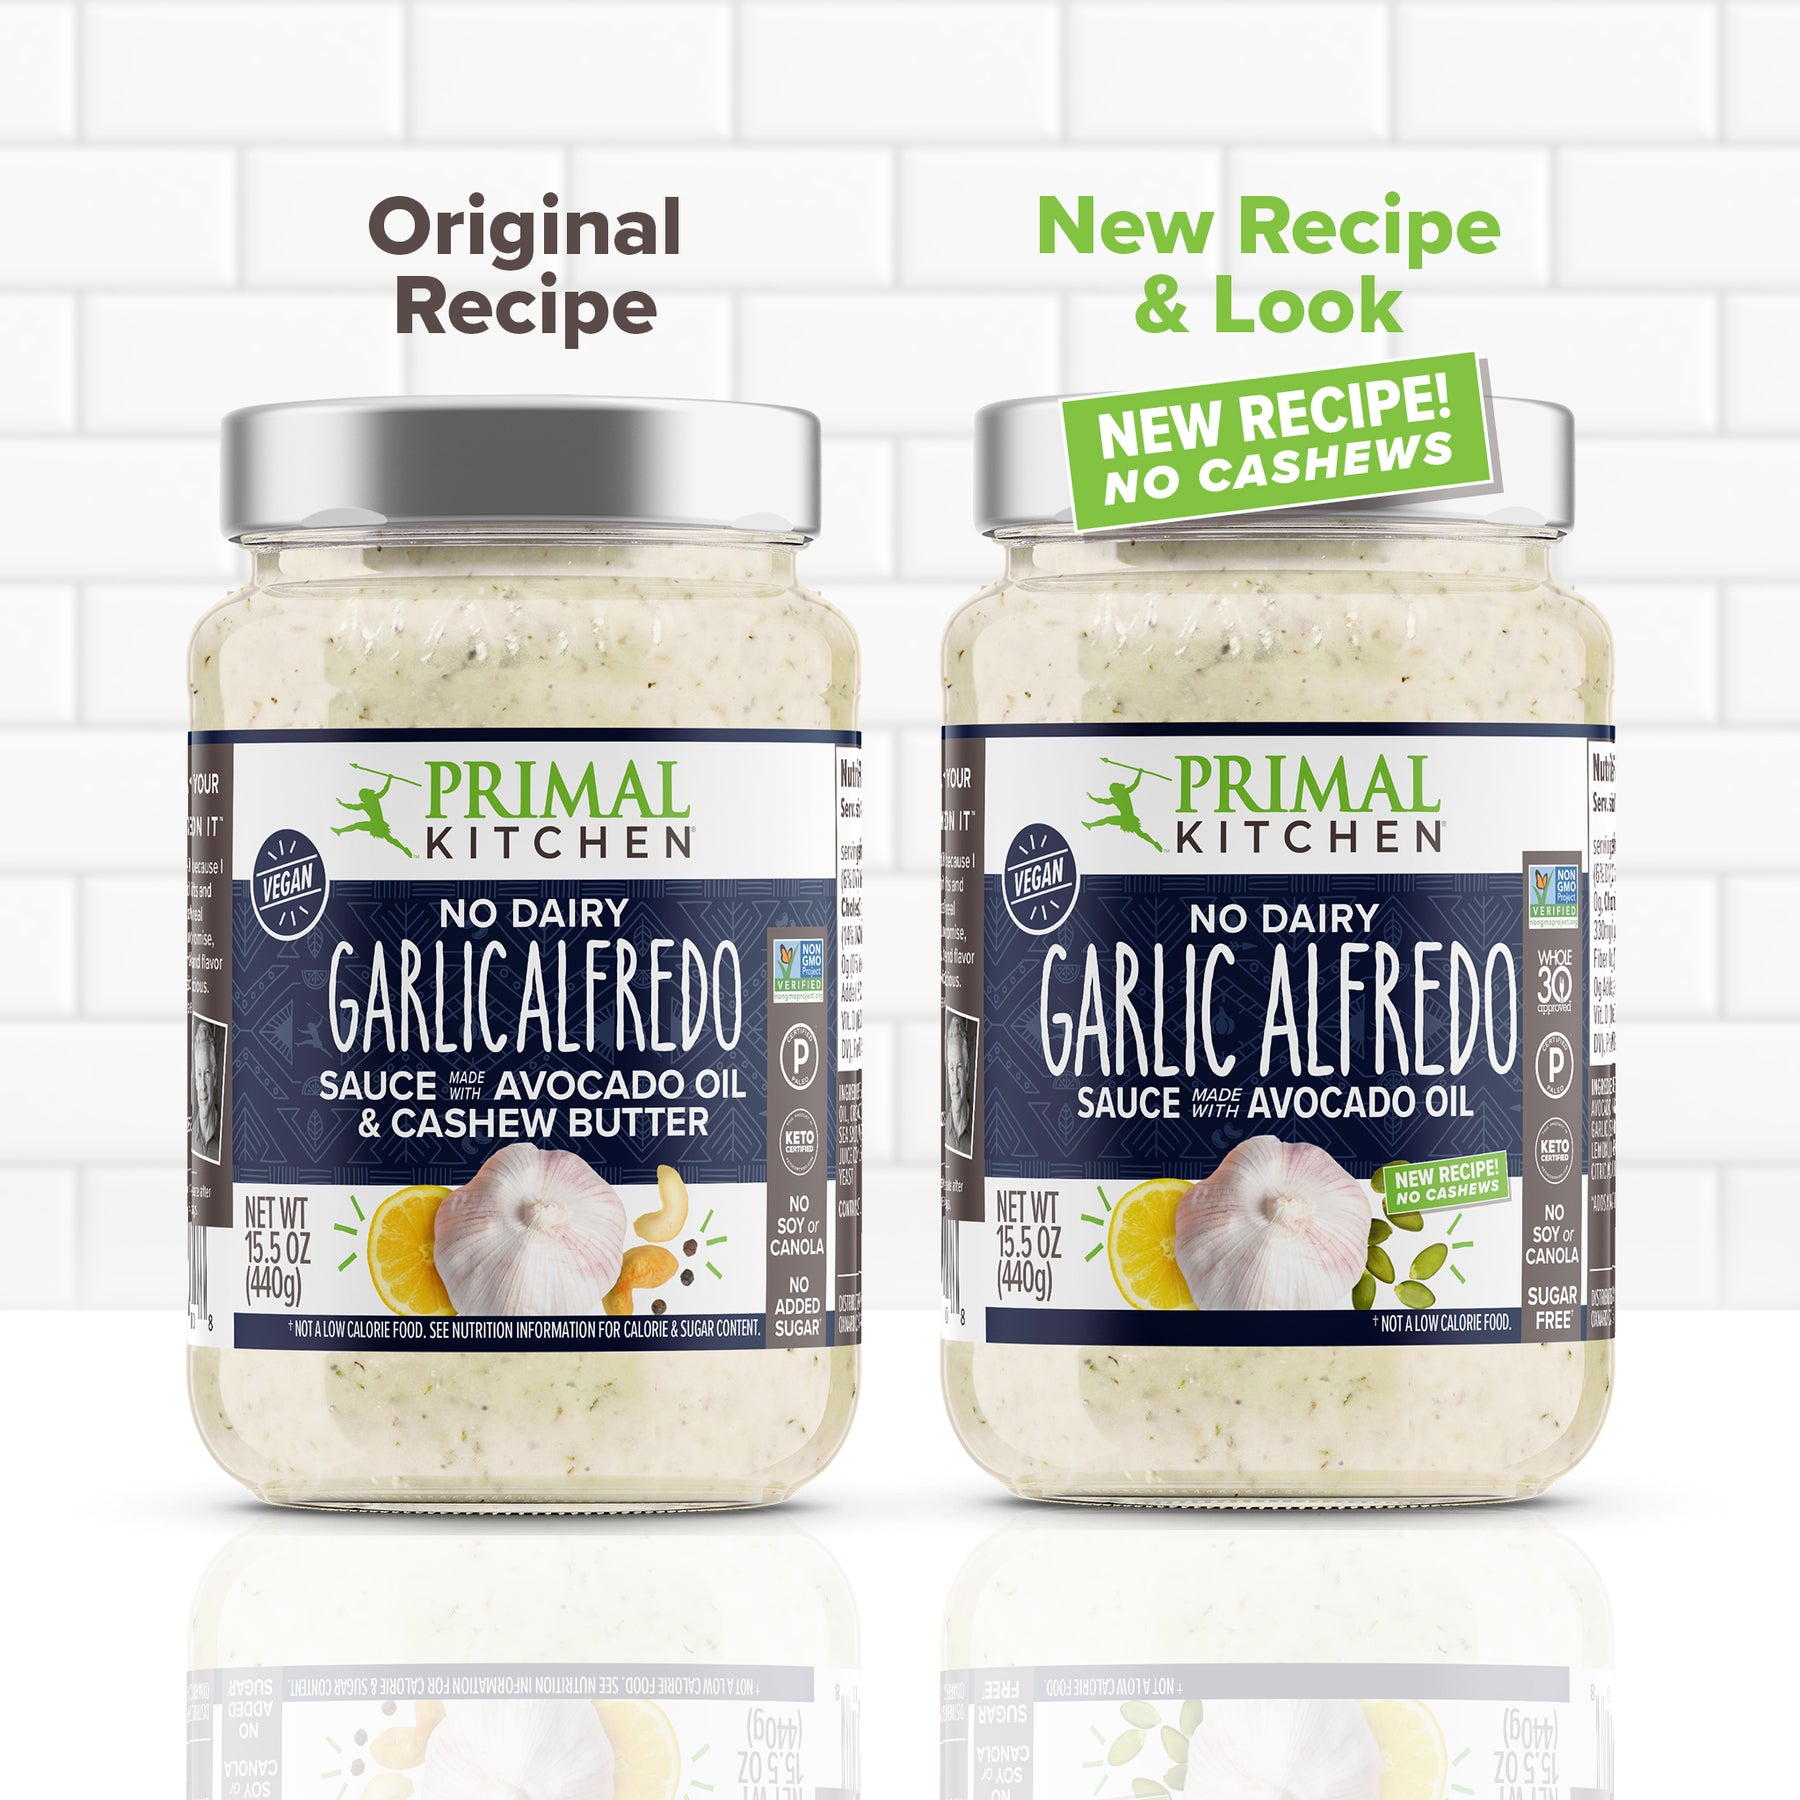 Two jars of Primal Kitchen Vegan No Dairy Garlic Alfredo Sauce. One jar is the original recipe made with cashew butter and the other is the new recipe without cashews. 